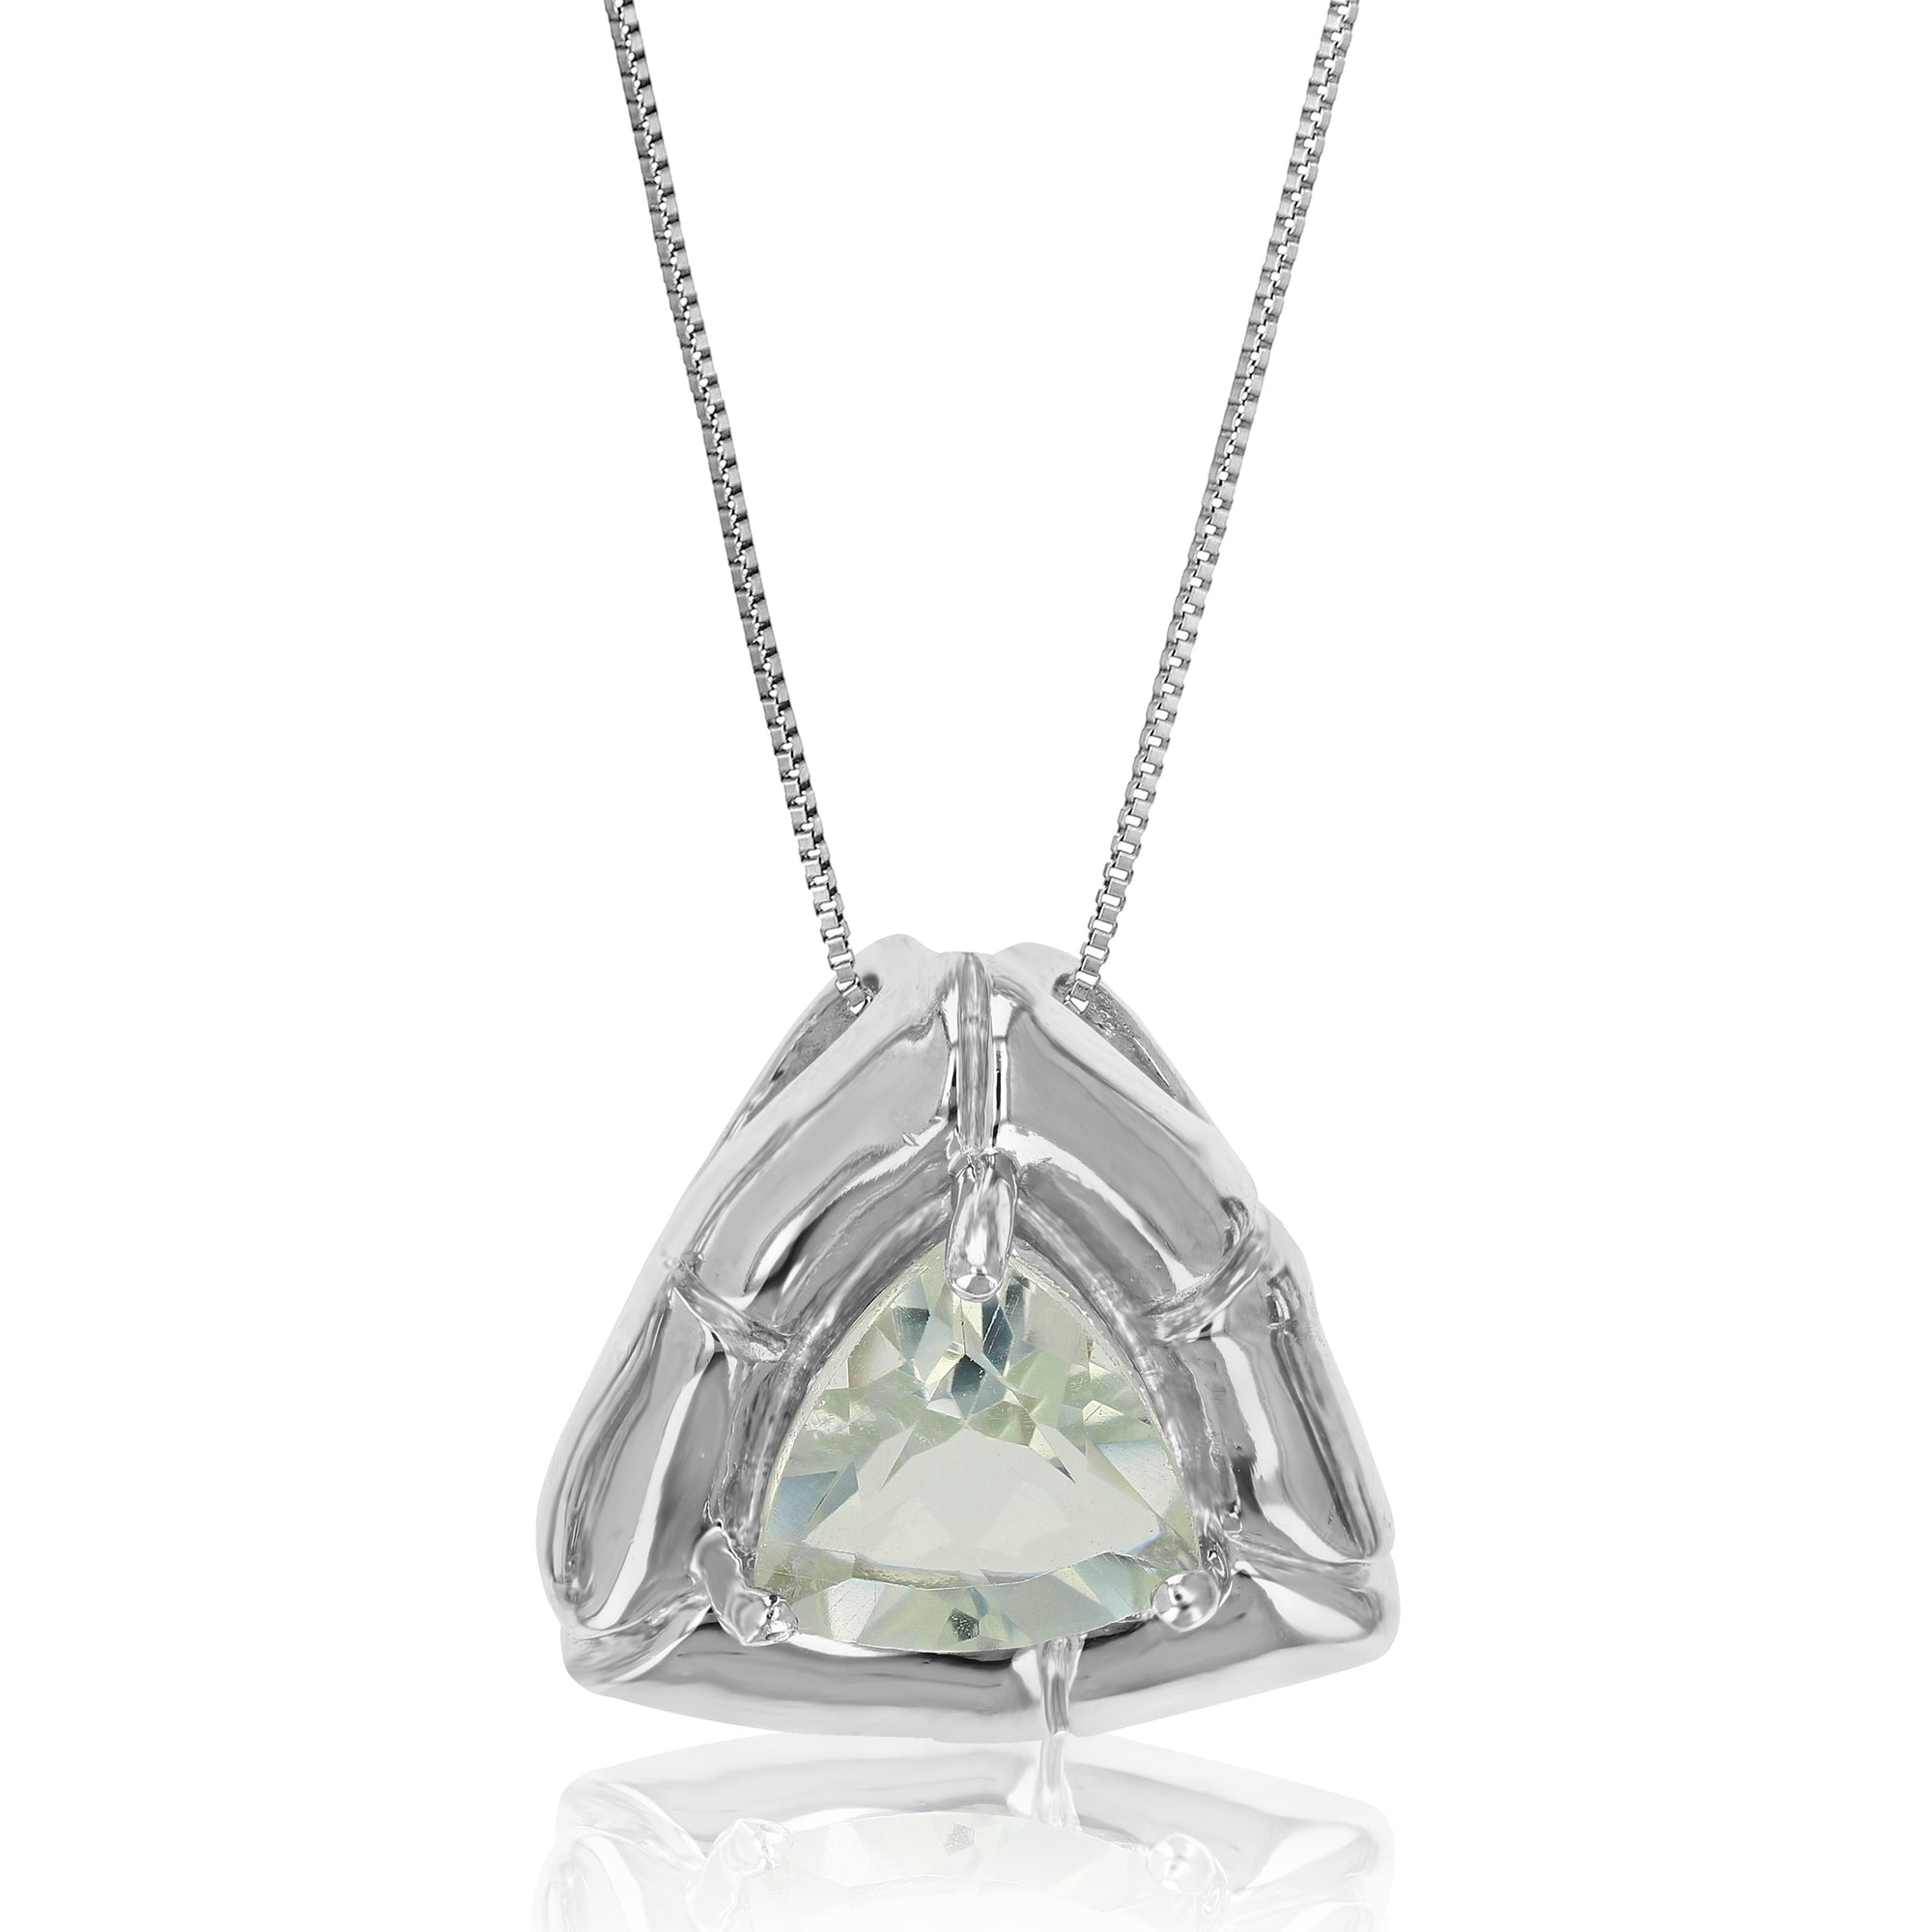 3/4 cttw Pendant Necklace, Green Amethyst Trillion Pendant Necklace for Women in .925 Sterling Silver with Rhodium, 18 Inch Chain, Prong Setting